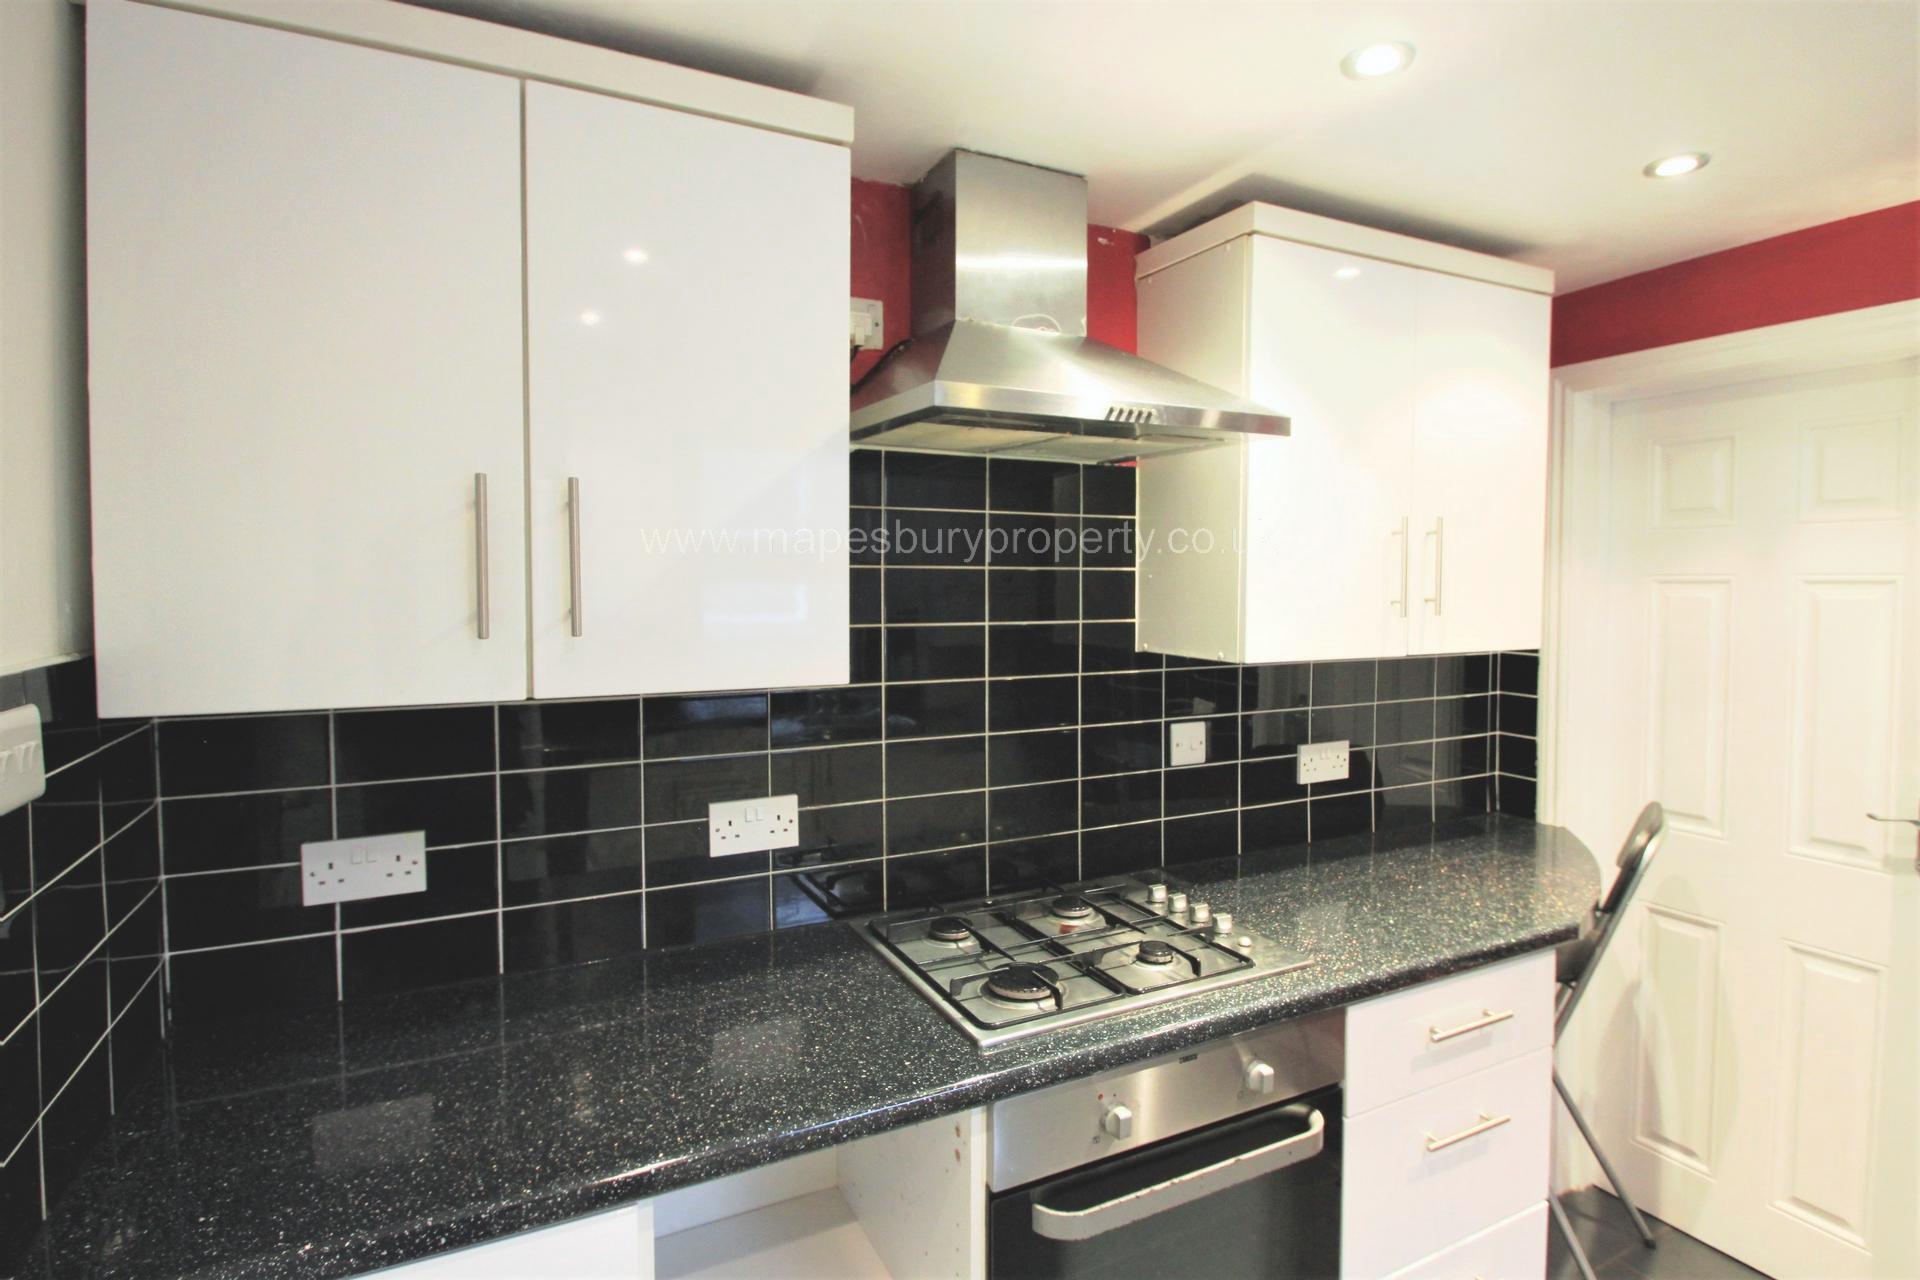 2 Bedroom Flat to rent in Kensal Rise, London, NW10